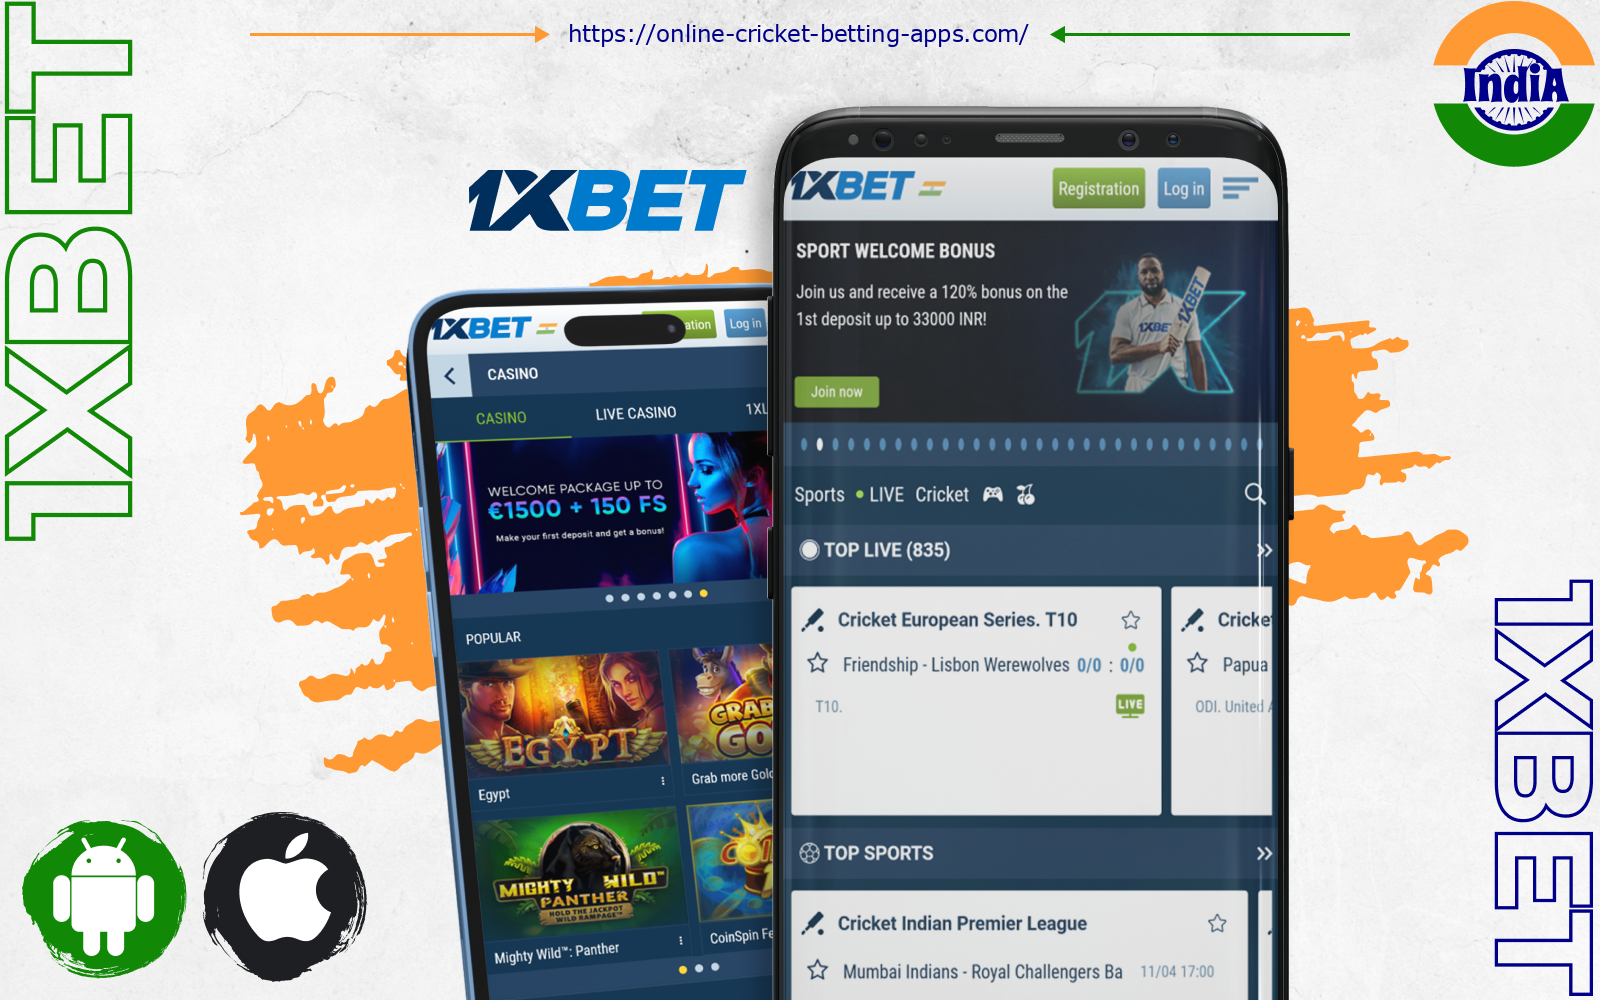 1xBet is one of the best cricket betting apps in India with an excellent reputation